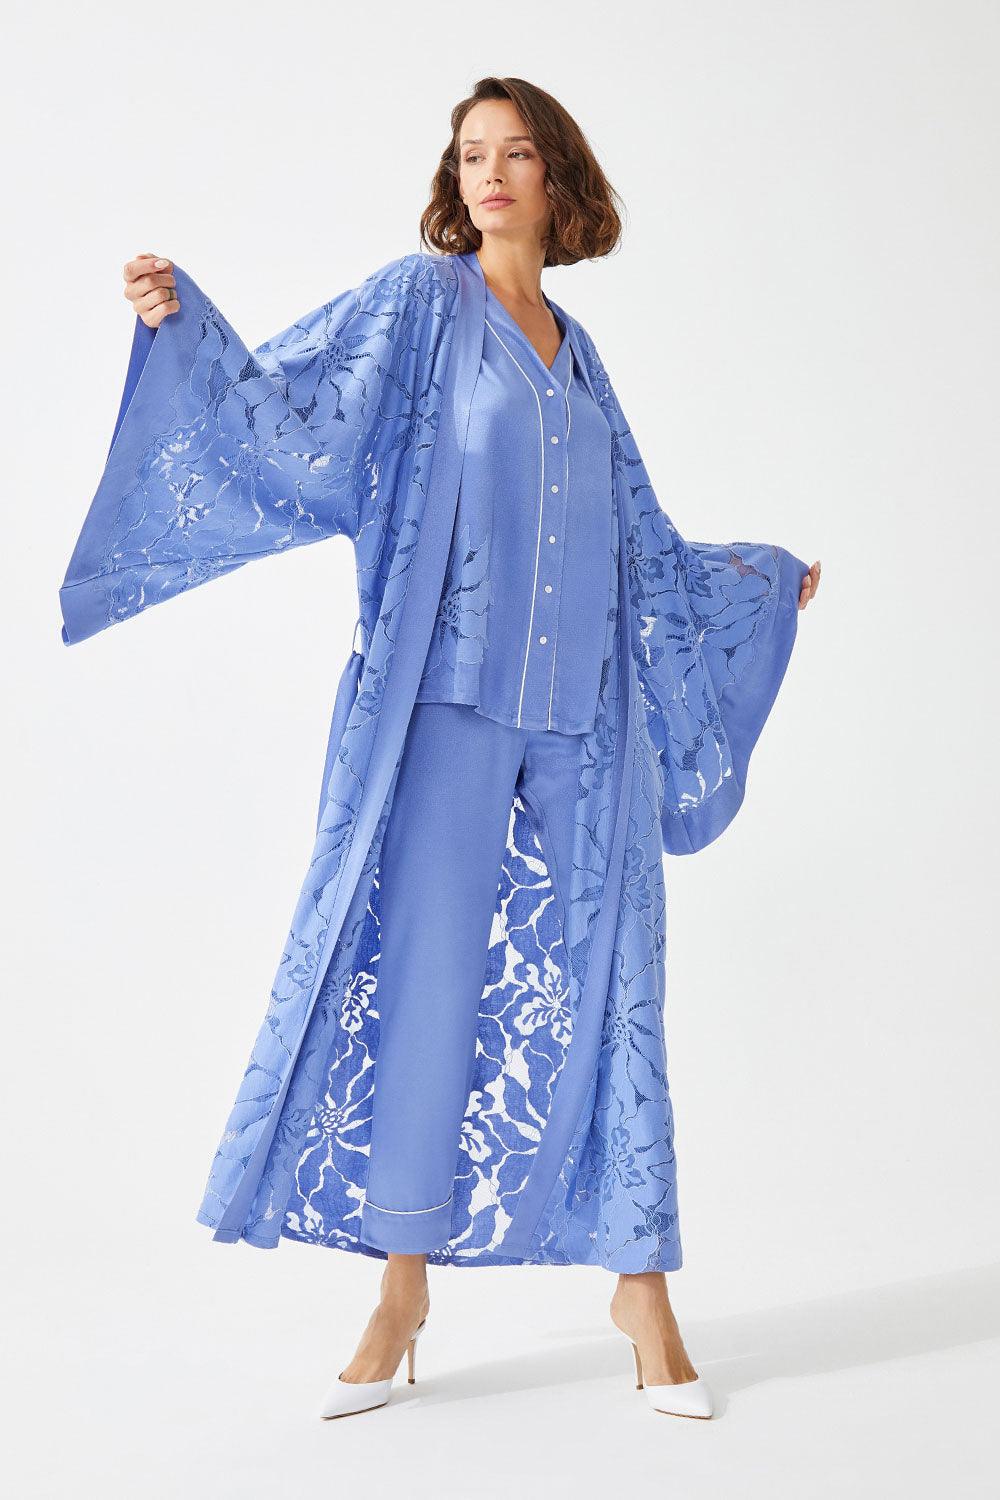 Rabenda Long Full Trimmed with Lace Robe Set - Lilac - Bocan